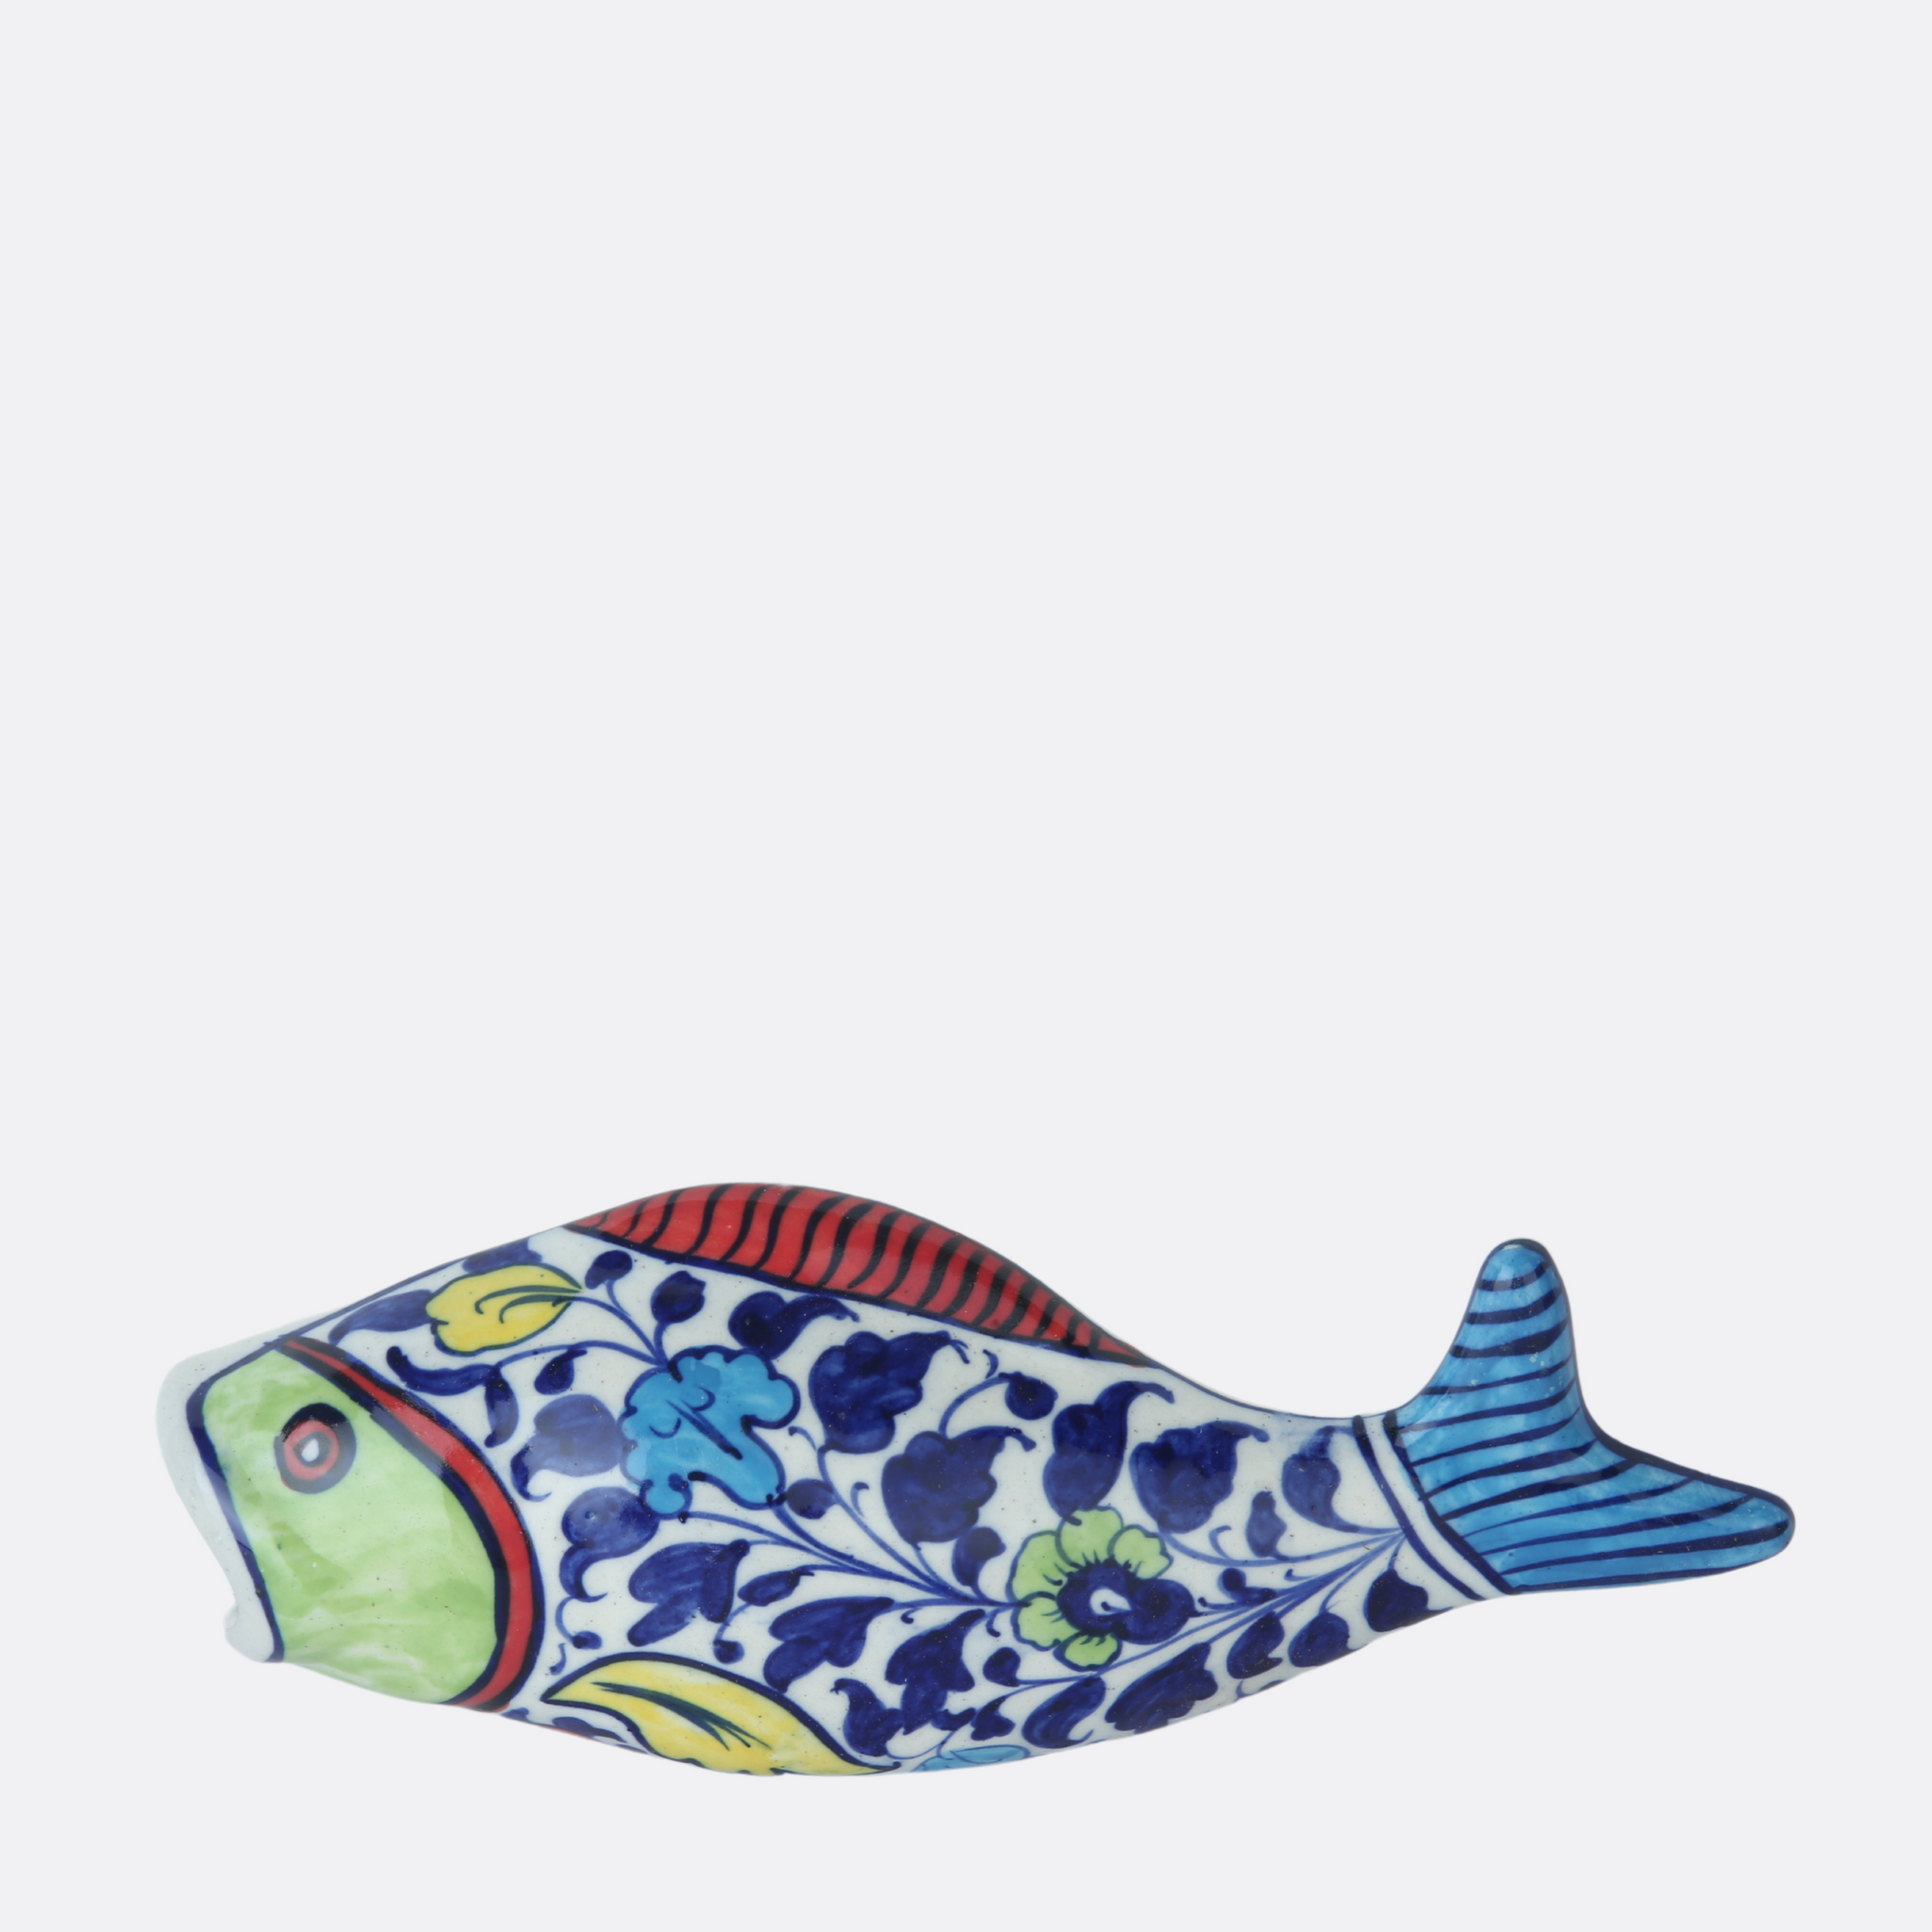 Hand Crafted Fish Wall Hanging